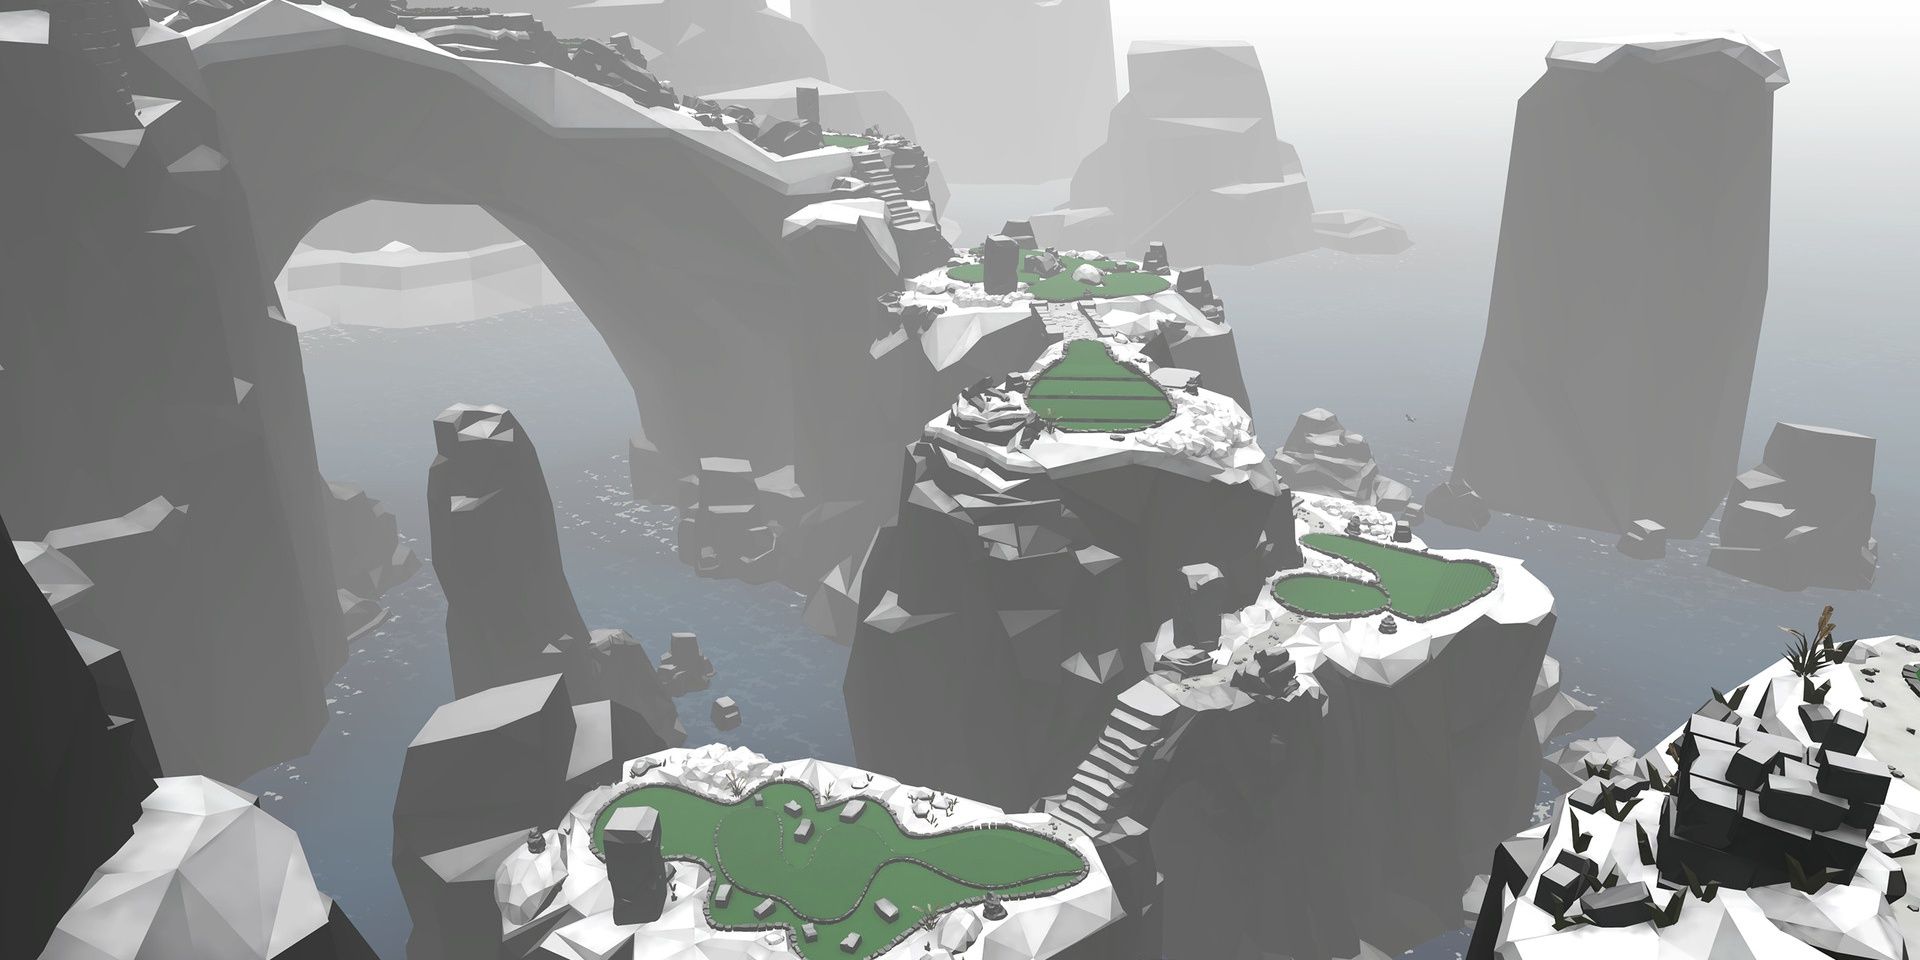 A mini-golf course built along snowy mountains in Walkabout Mini Golf VR